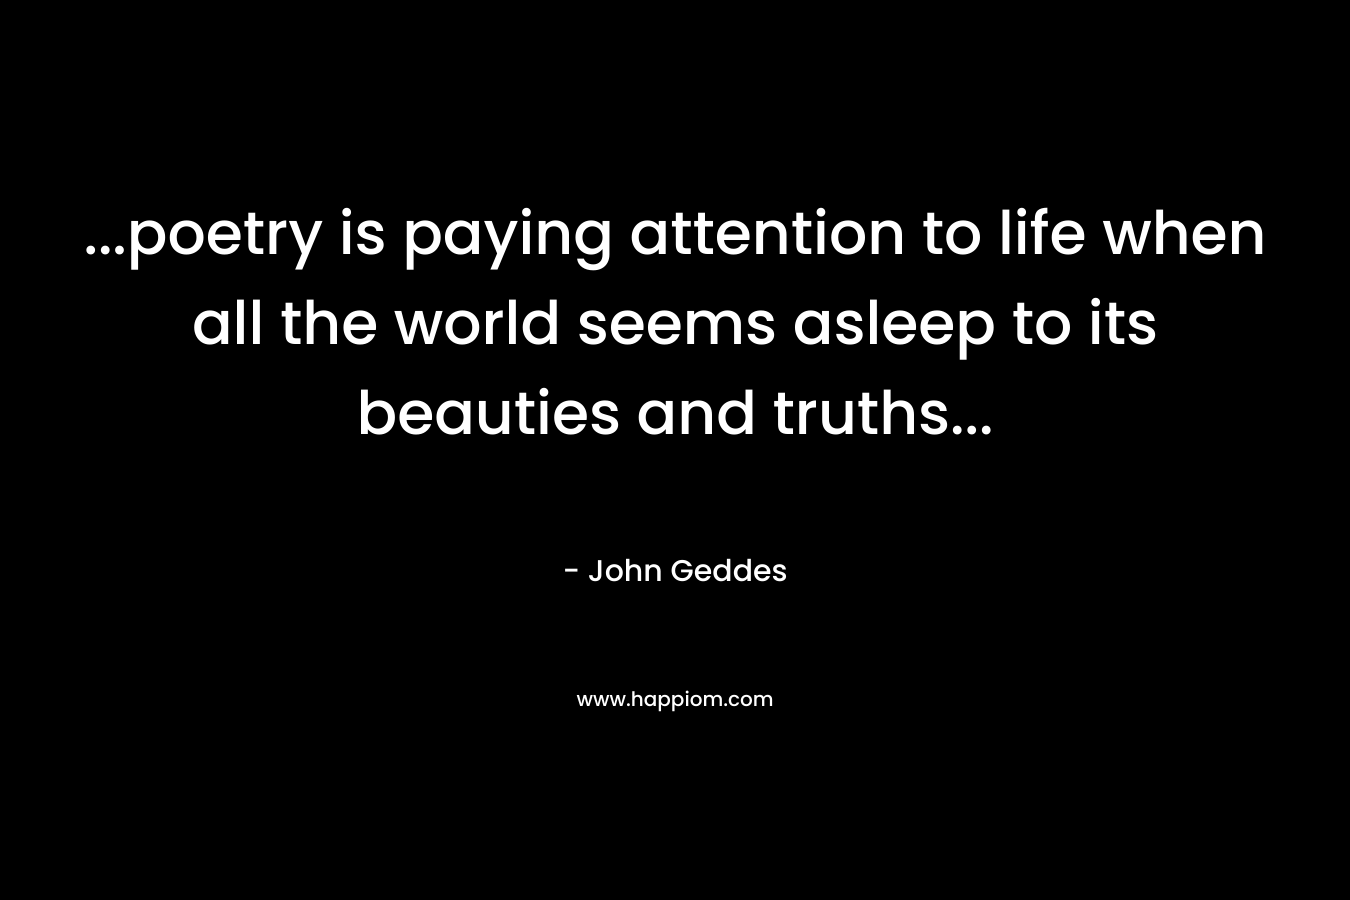 ...poetry is paying attention to life when all the world seems asleep to its beauties and truths...